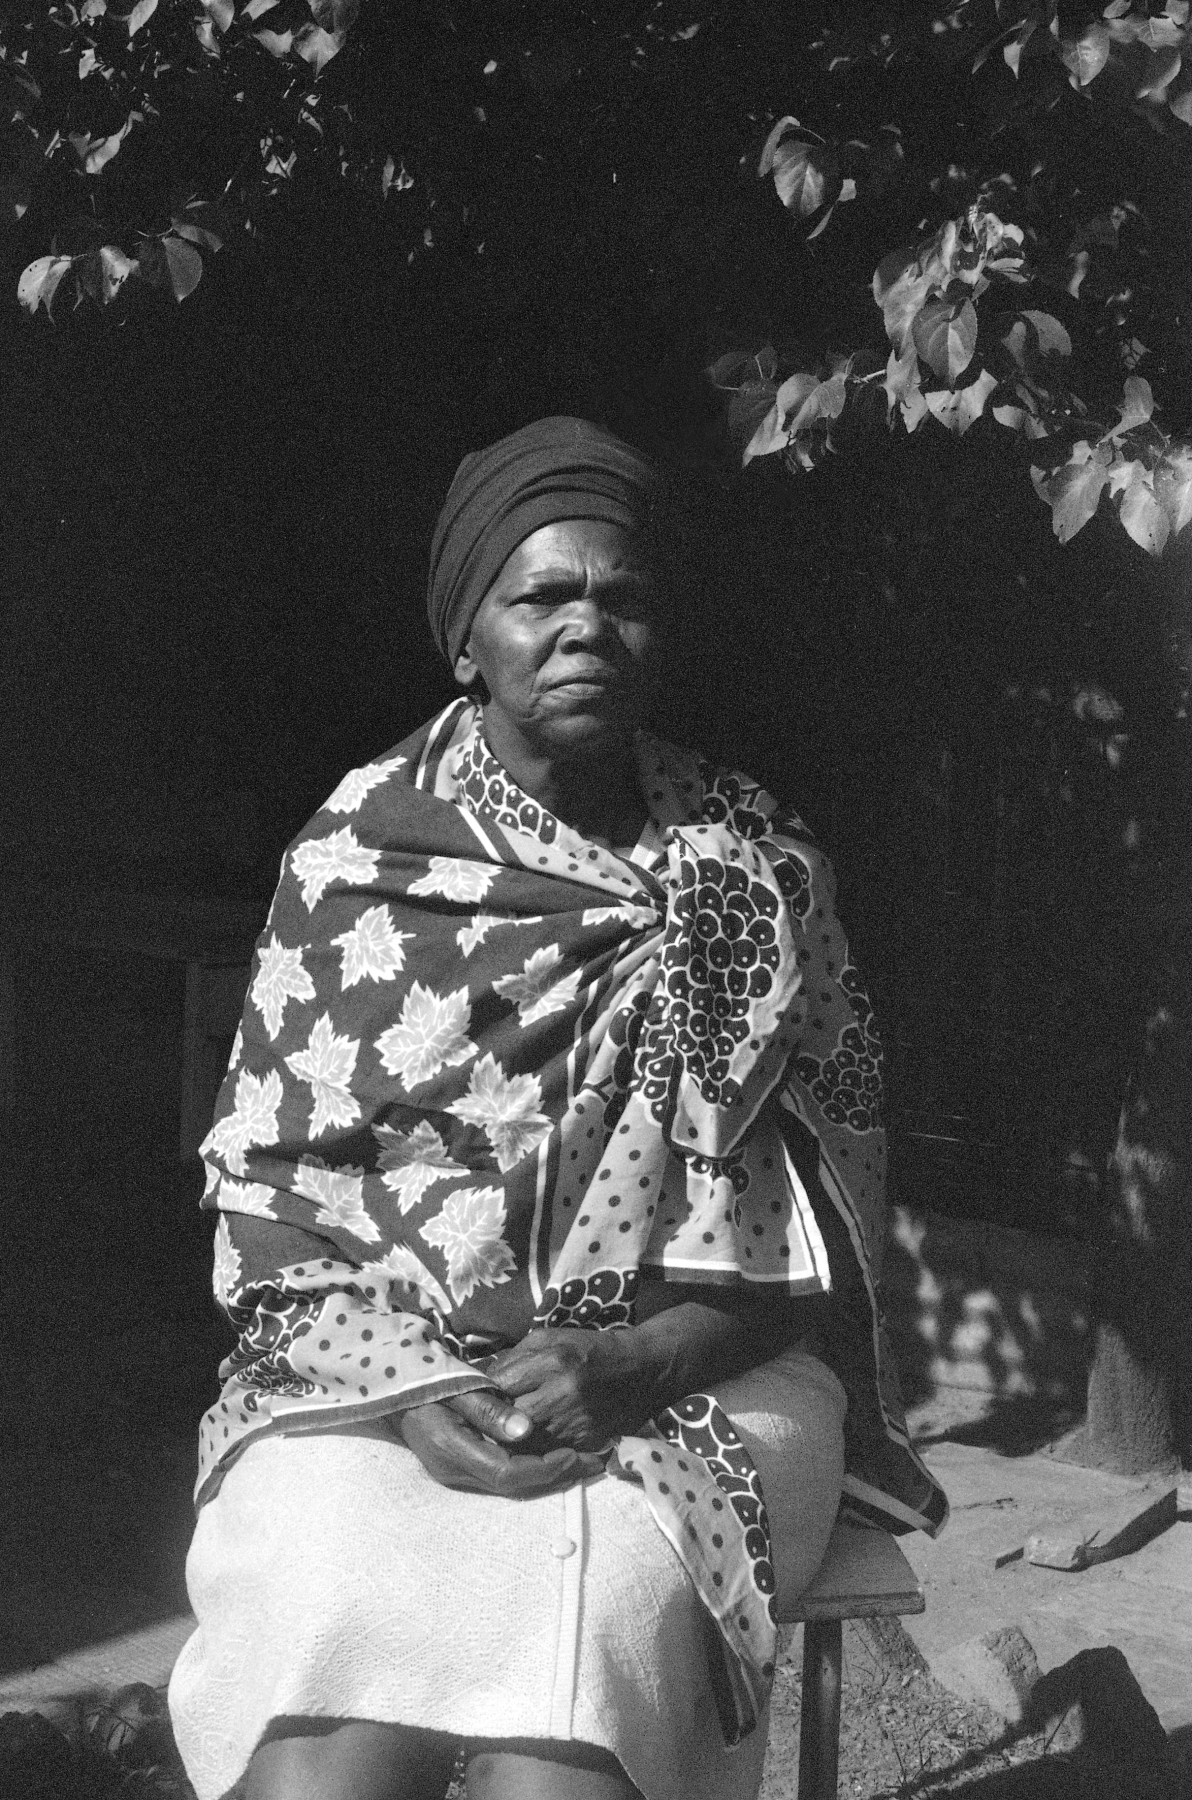 All Our Mothers: Virginia Mngoma, Alexandra, Johannesburg
1984
Archival ink on archival paper
Work: 71.5 x 51.5 cm
STD 2/6
Edition of 6

Enquire